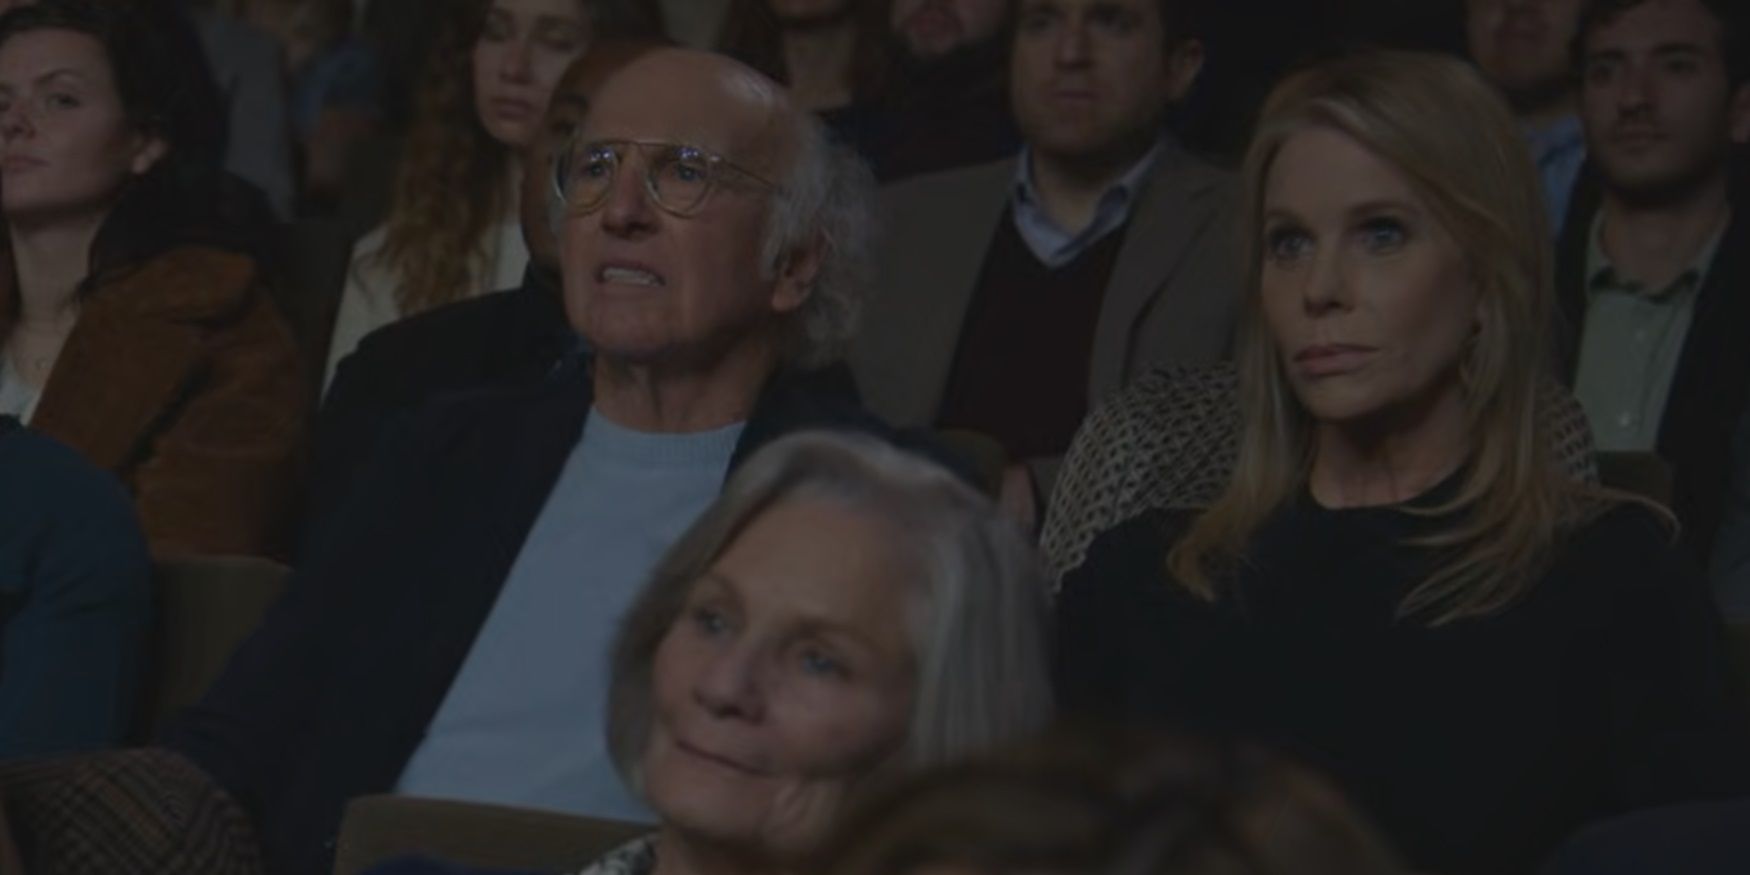 Larry and Cheryl at a theater in Curb Your Enthusiasm